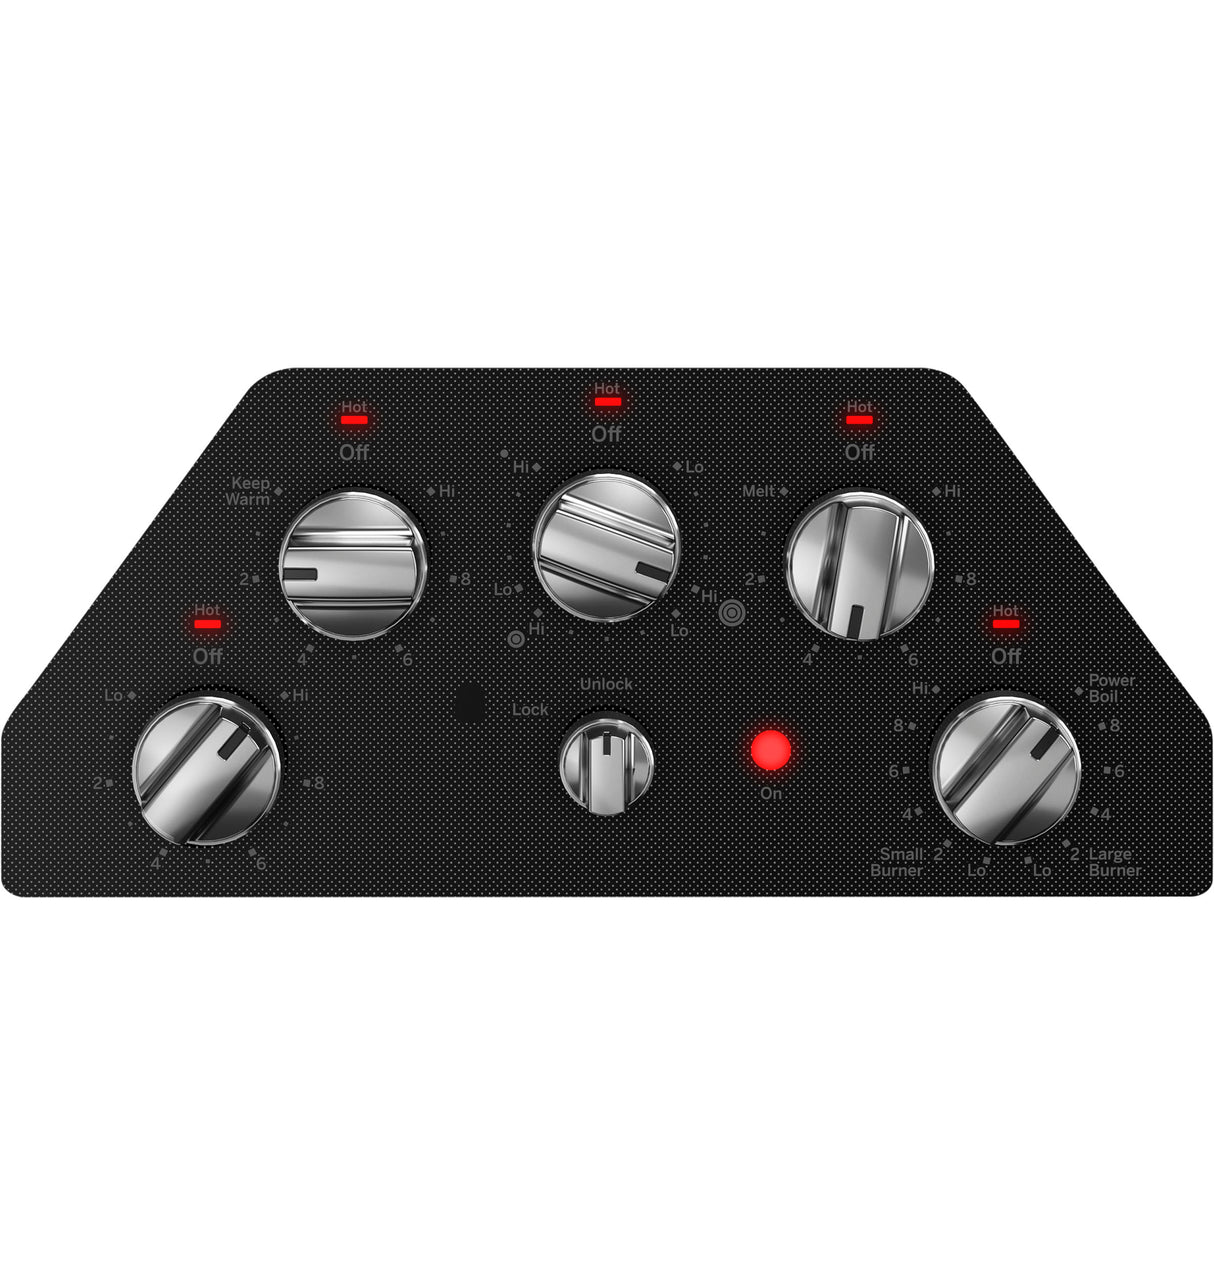 GE(R) 36" Built-In Knob Control Electric Cooktop - (JEP5036STSS)